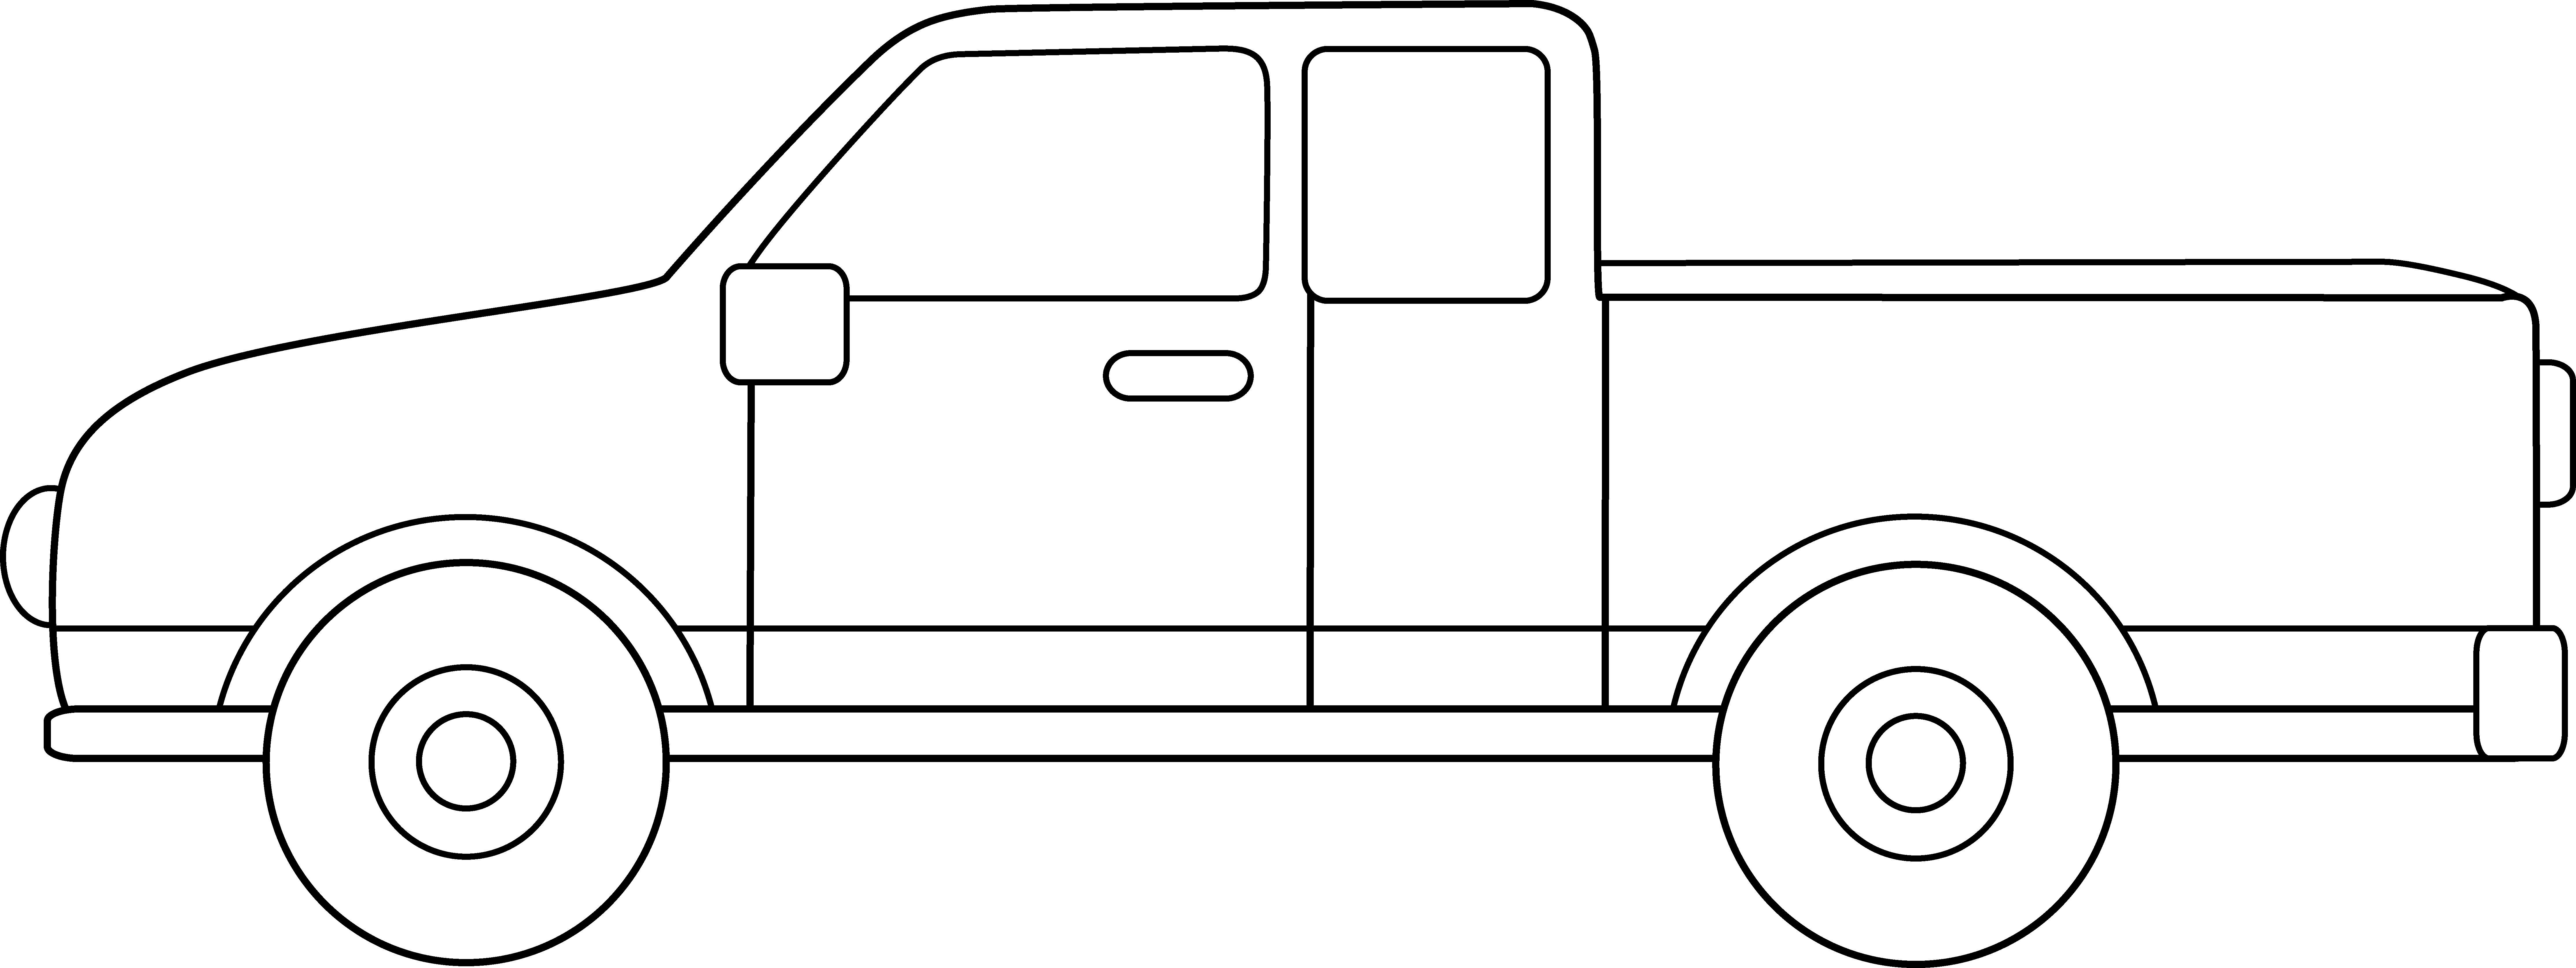 Truck Clipart Black And White.